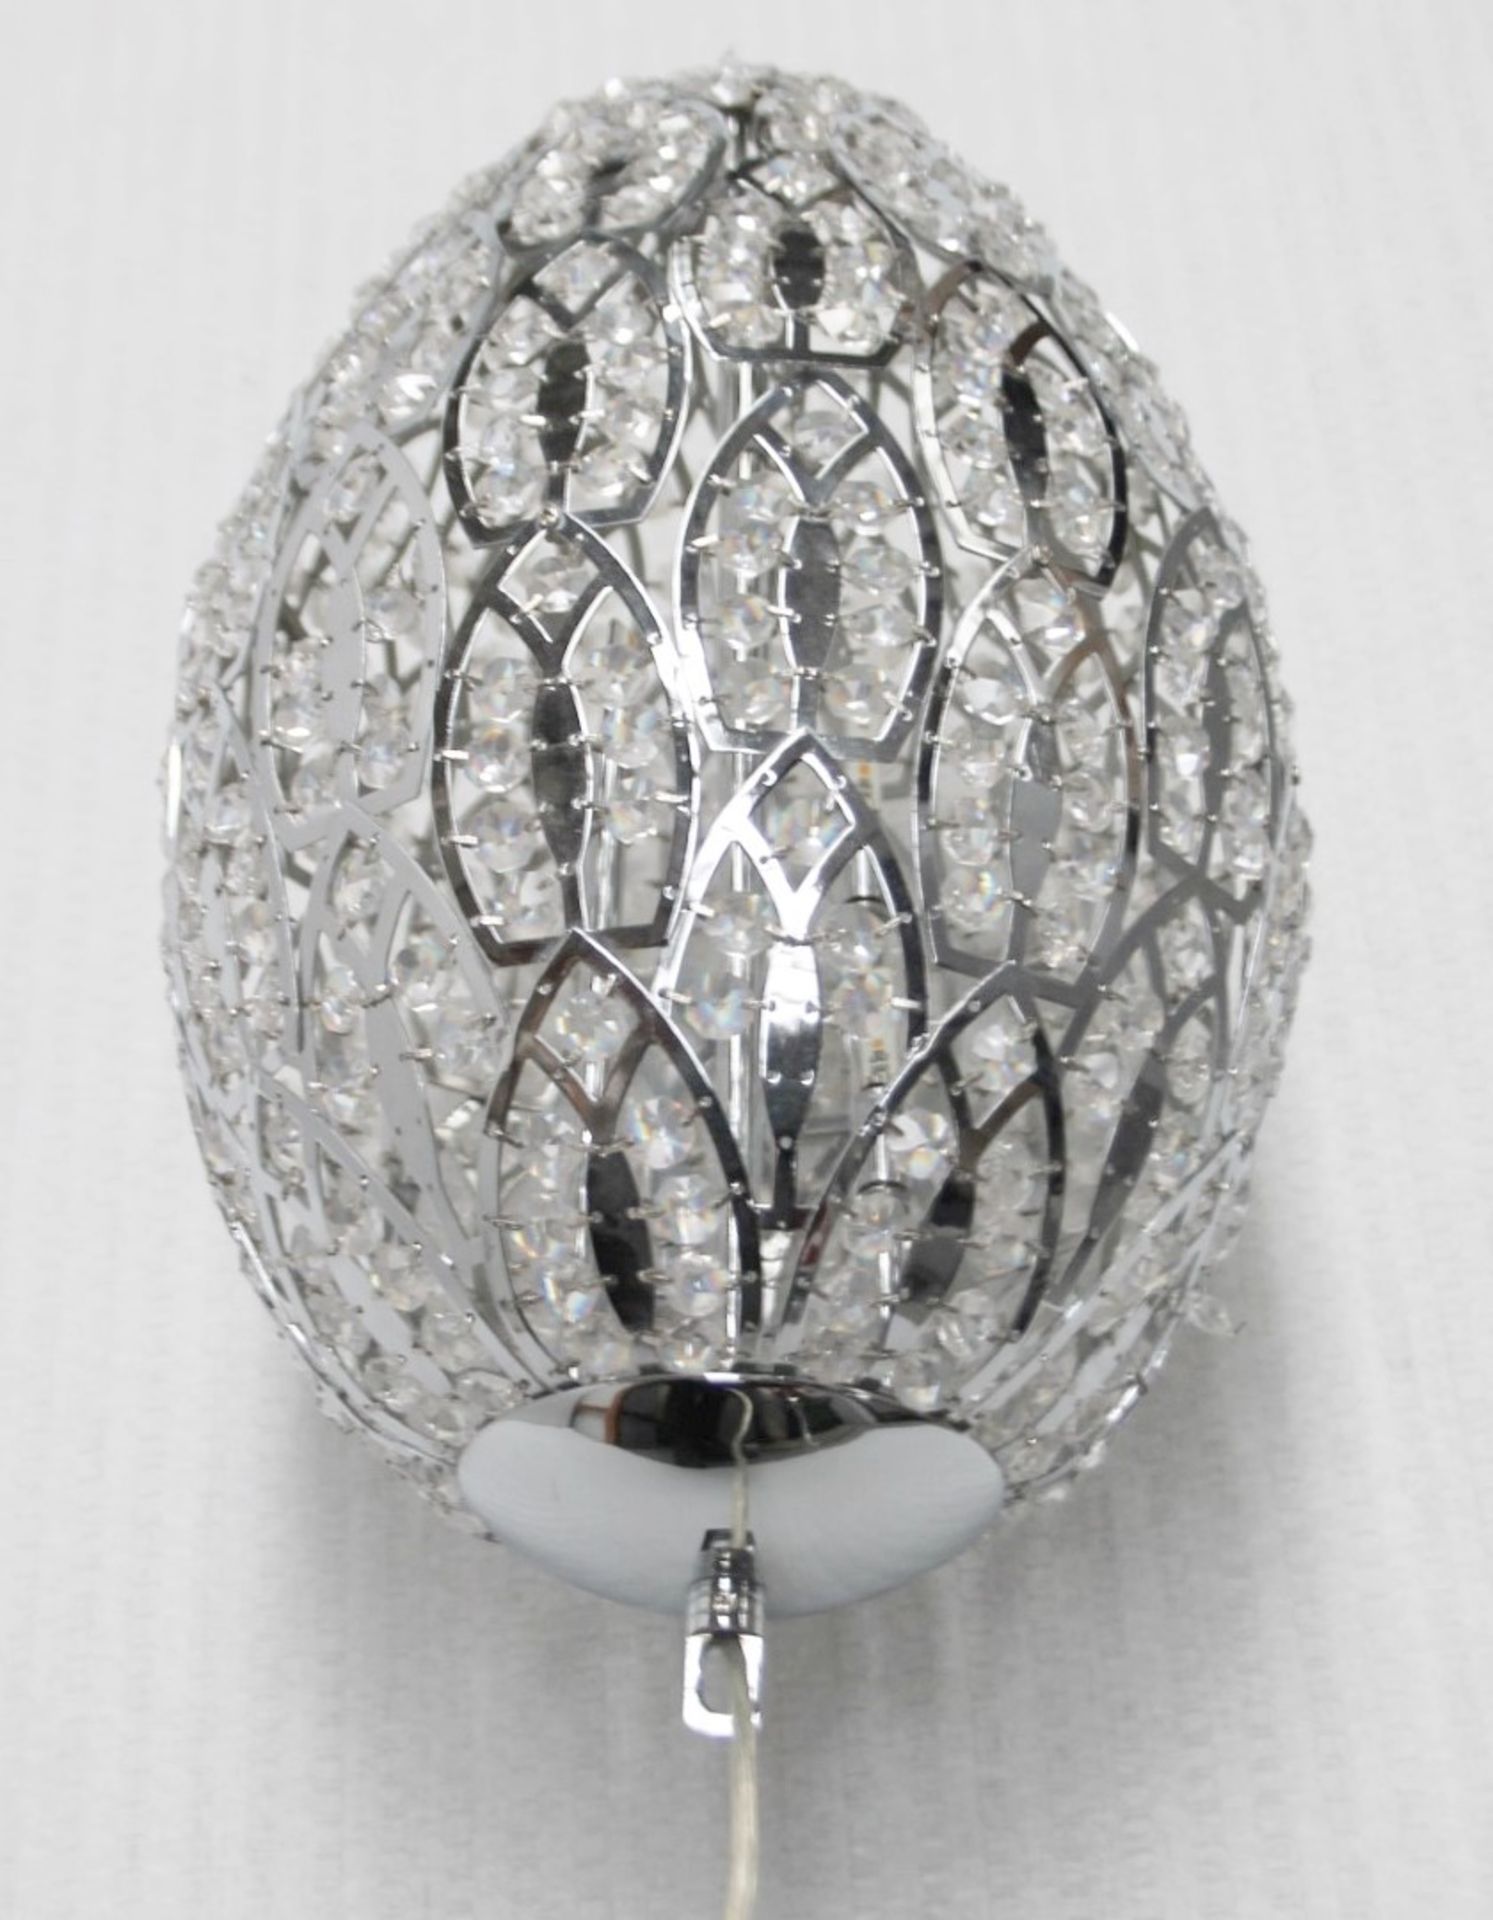 1 x High-end Italian LED Egg-Shaped Light Fitting Encrusted In Premium ASFOUR Crystals - RRP £4,000 - Image 7 of 9